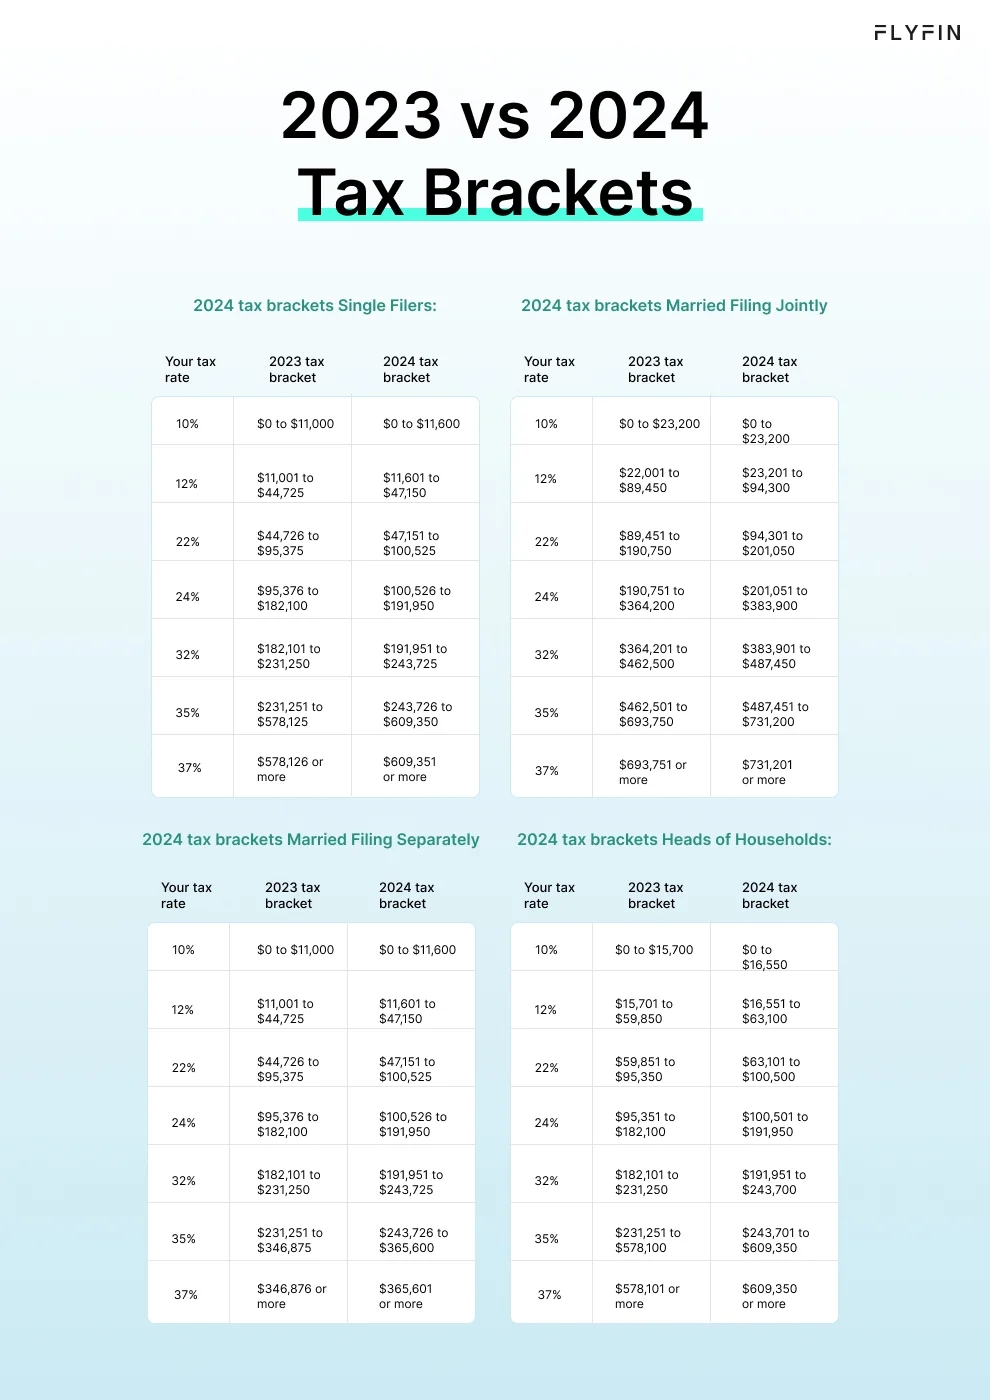 Infographic entitled tax brackets listing the tax brackets and  tax rates for different filing statuses for 2023 vs 2024.